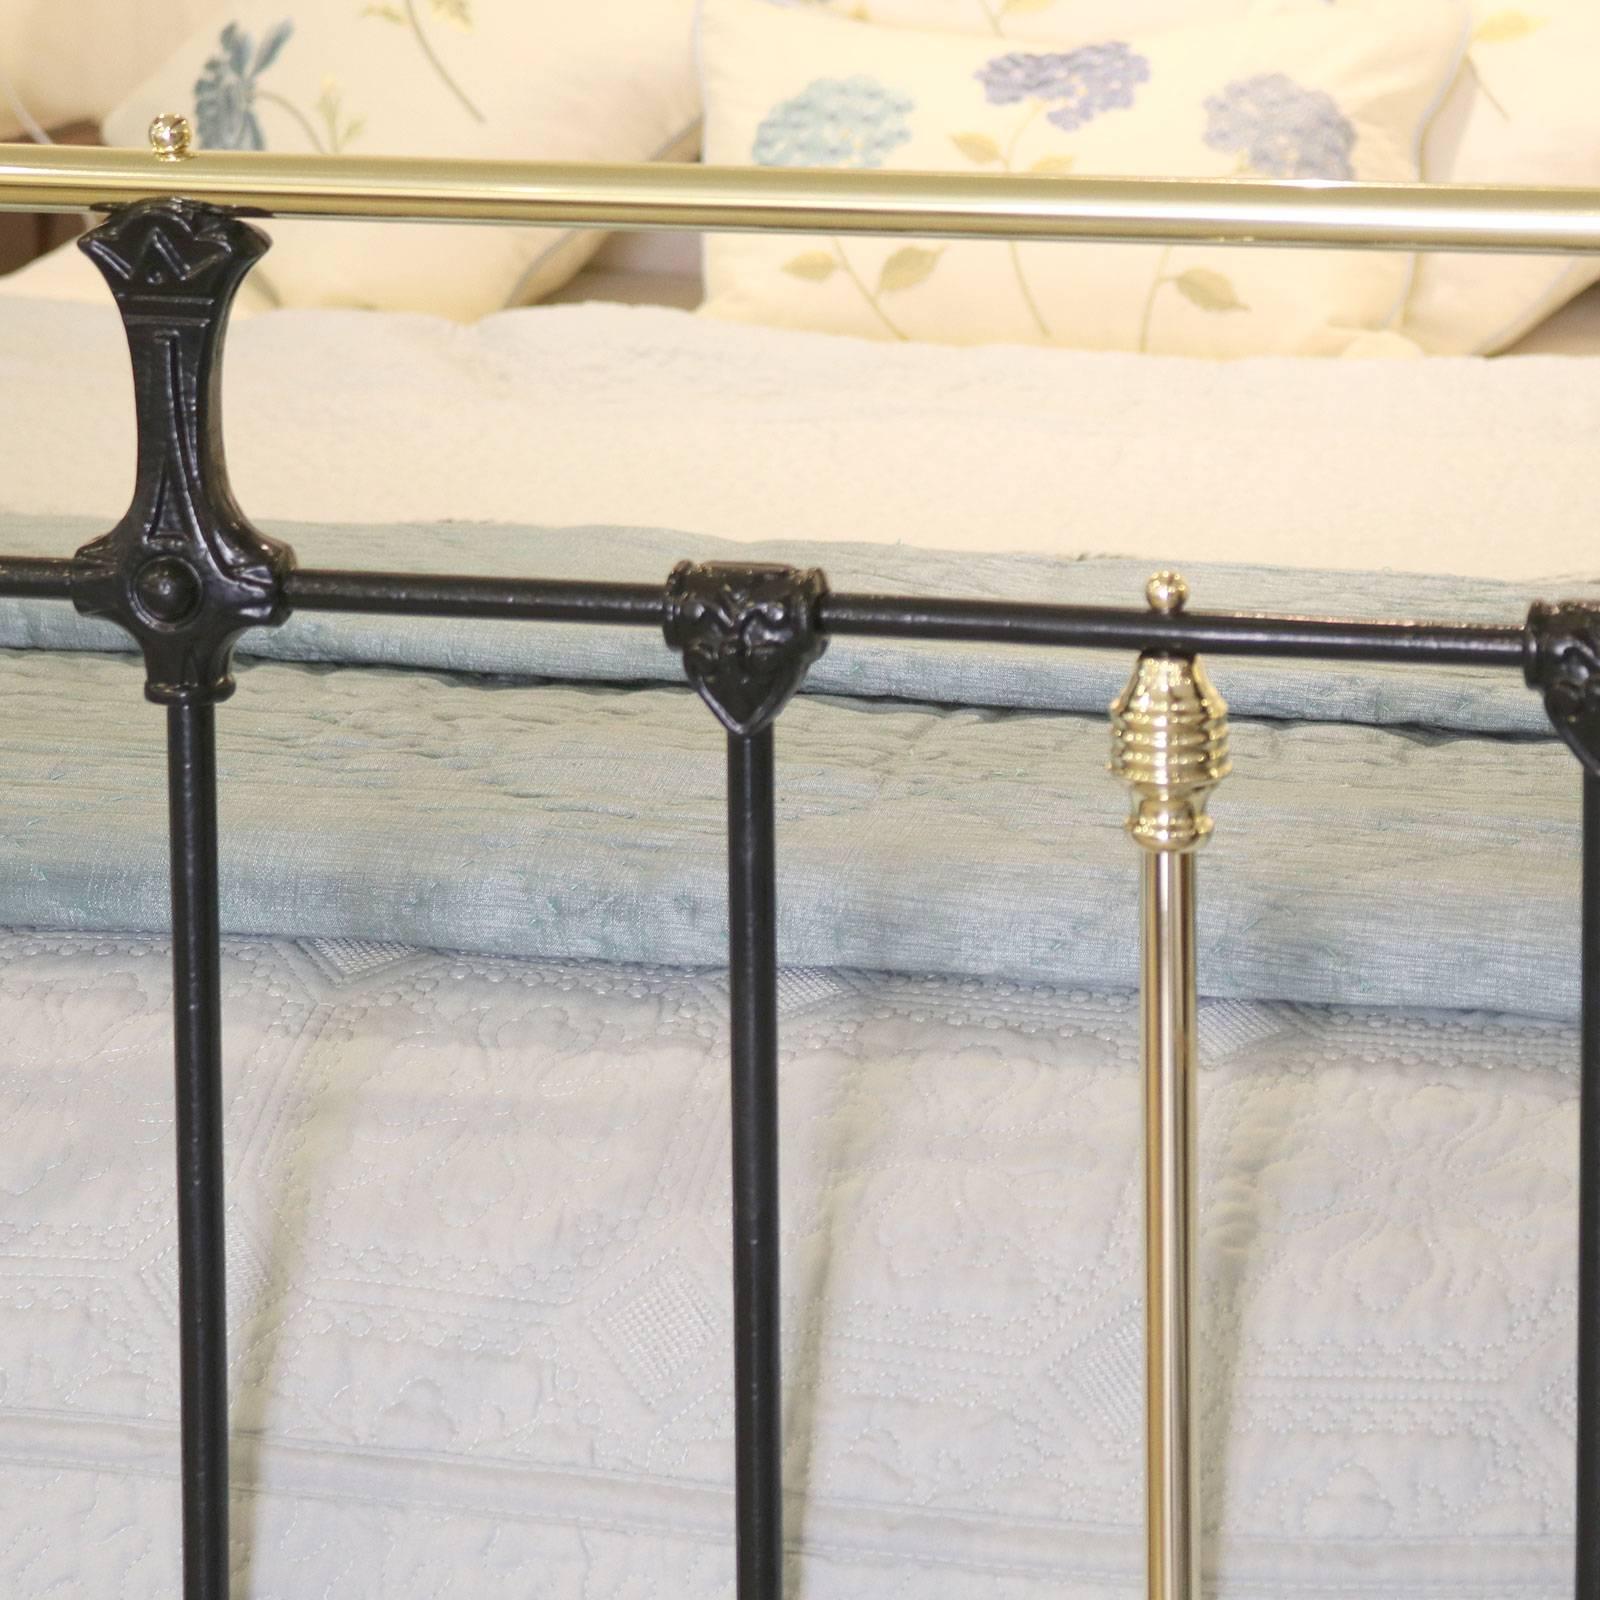 A brass and iron bed adapted from an original Victorian frame and finished in black, with ornate castings and brass straight top rail.

This bed accepts a 60 inch wide British king-size or American queen-size (5ft or 150cm) base and mattress